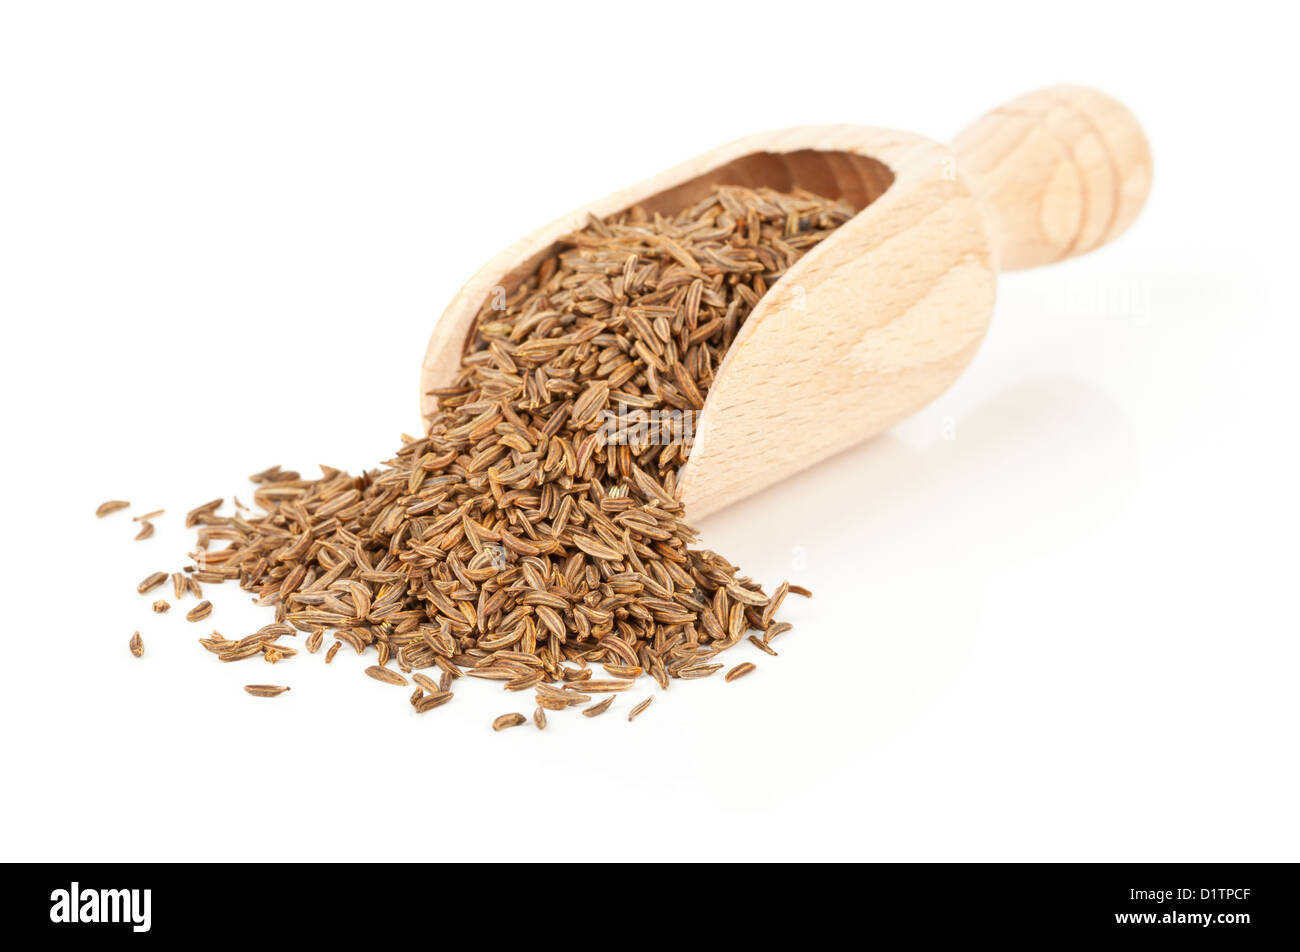 Caraway/ Cumin seeds in wooden scoop over white background Stock Photo